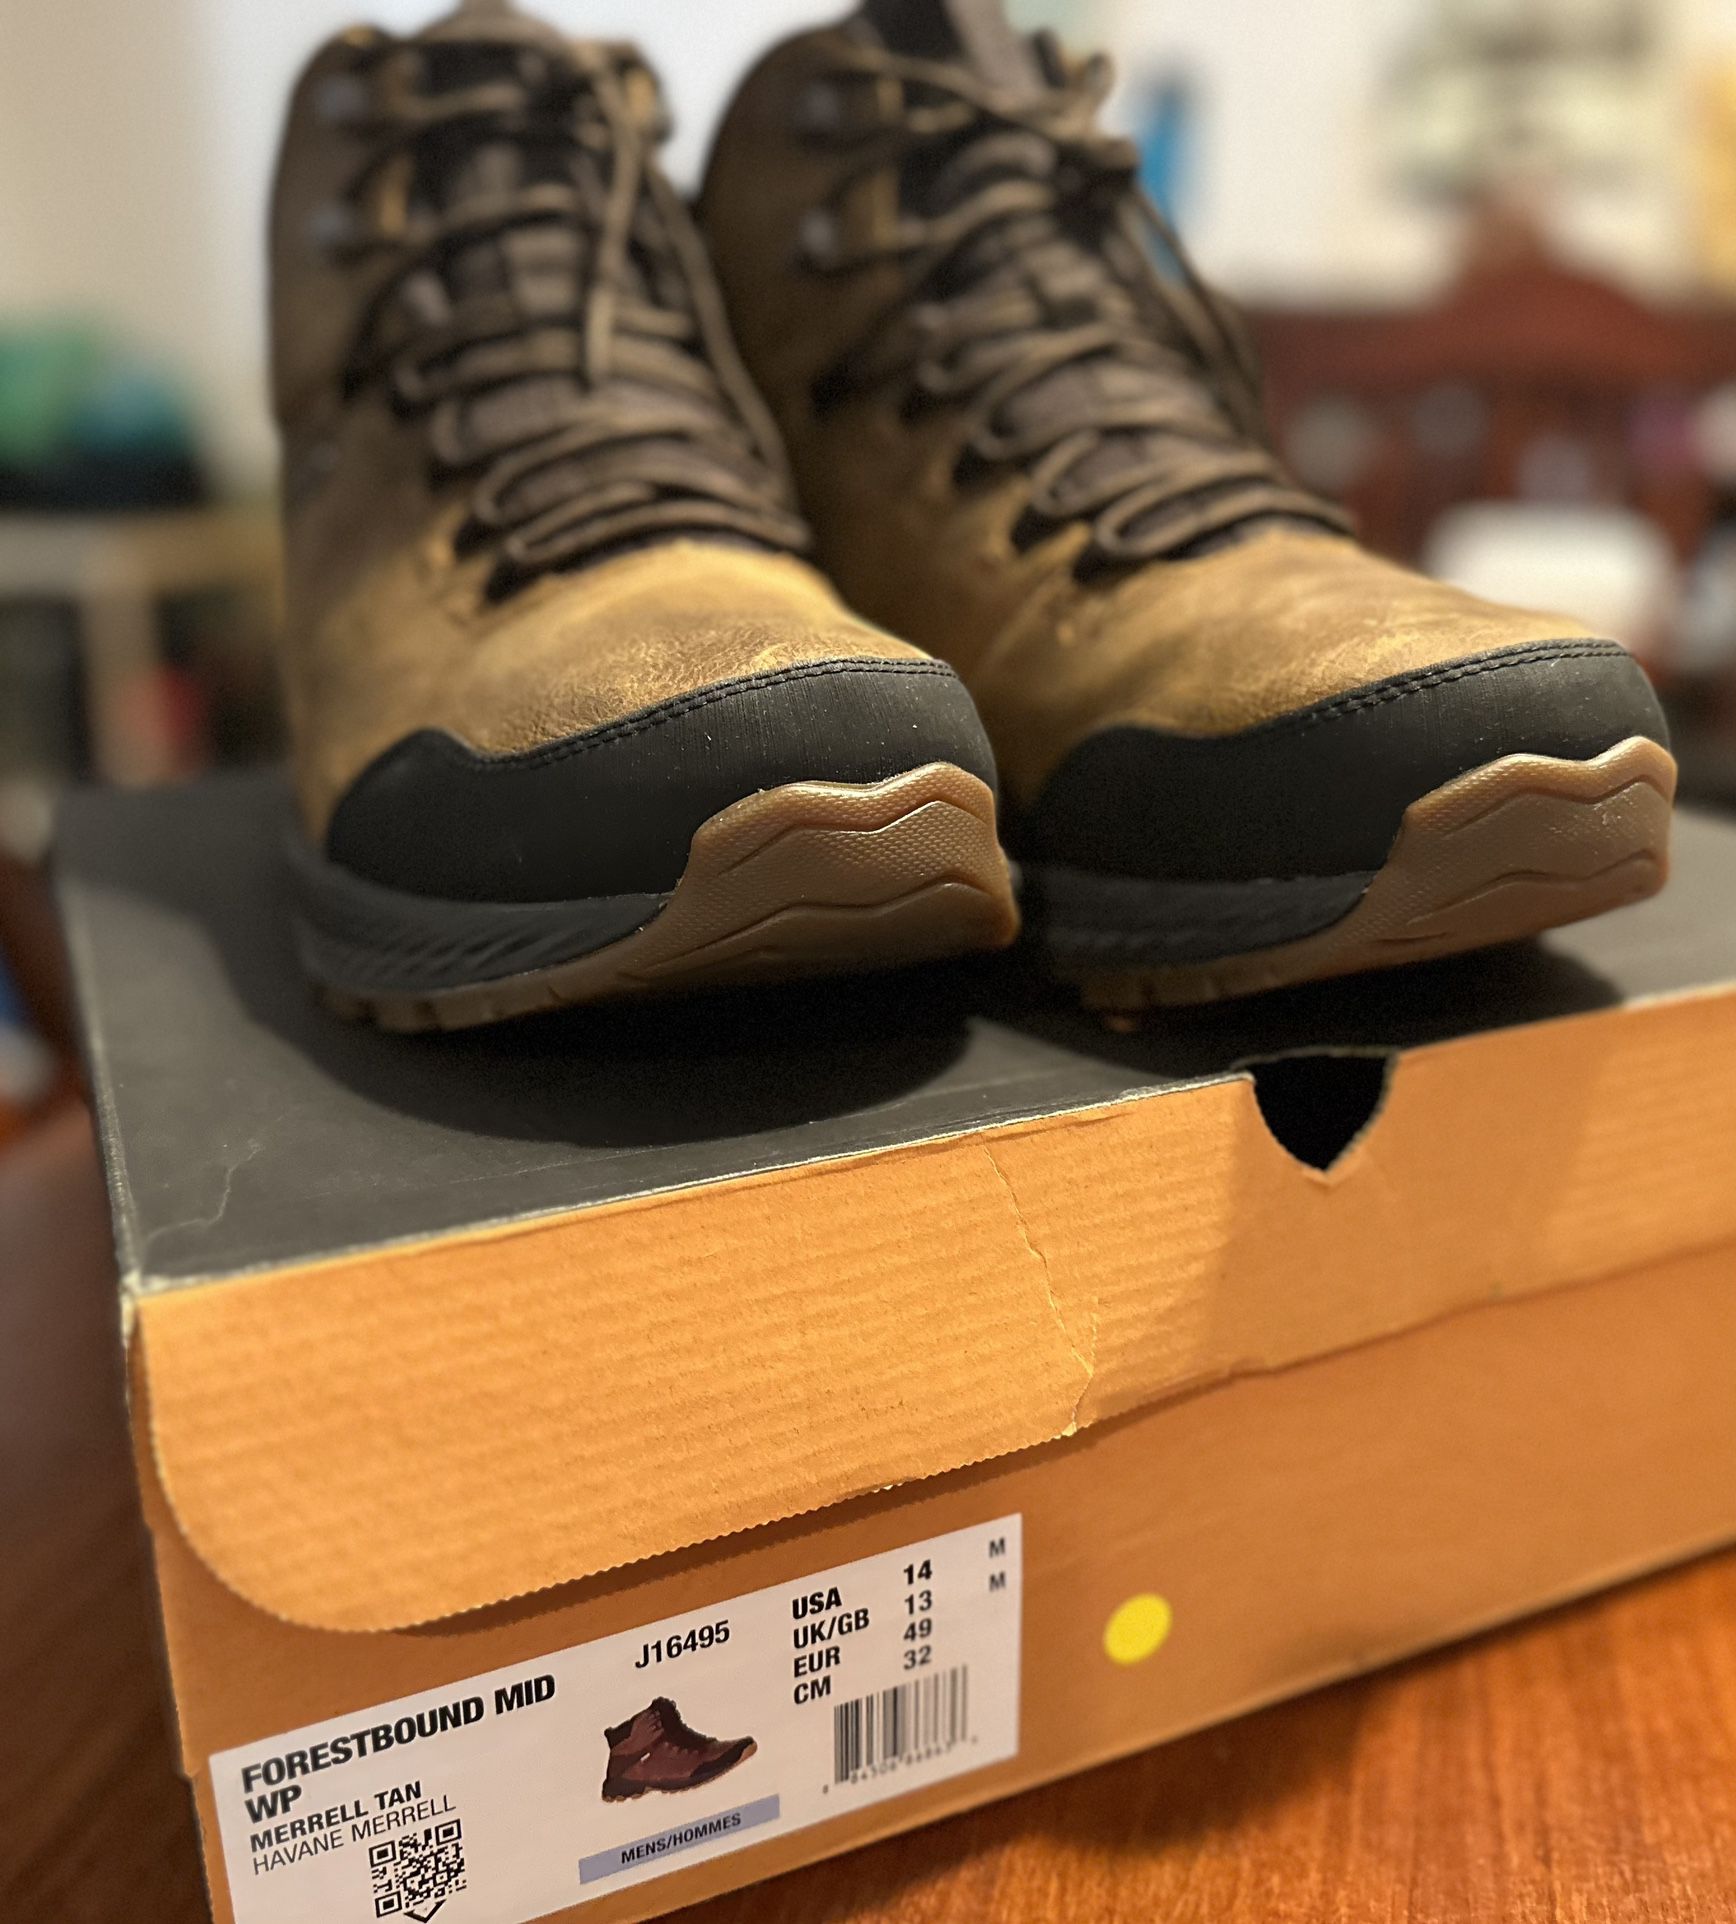 New- Merrell Forestbound Mid WP Waterproof Boots J16495 Men's Size 14 for Sale in Philadelphia, PA OfferUp